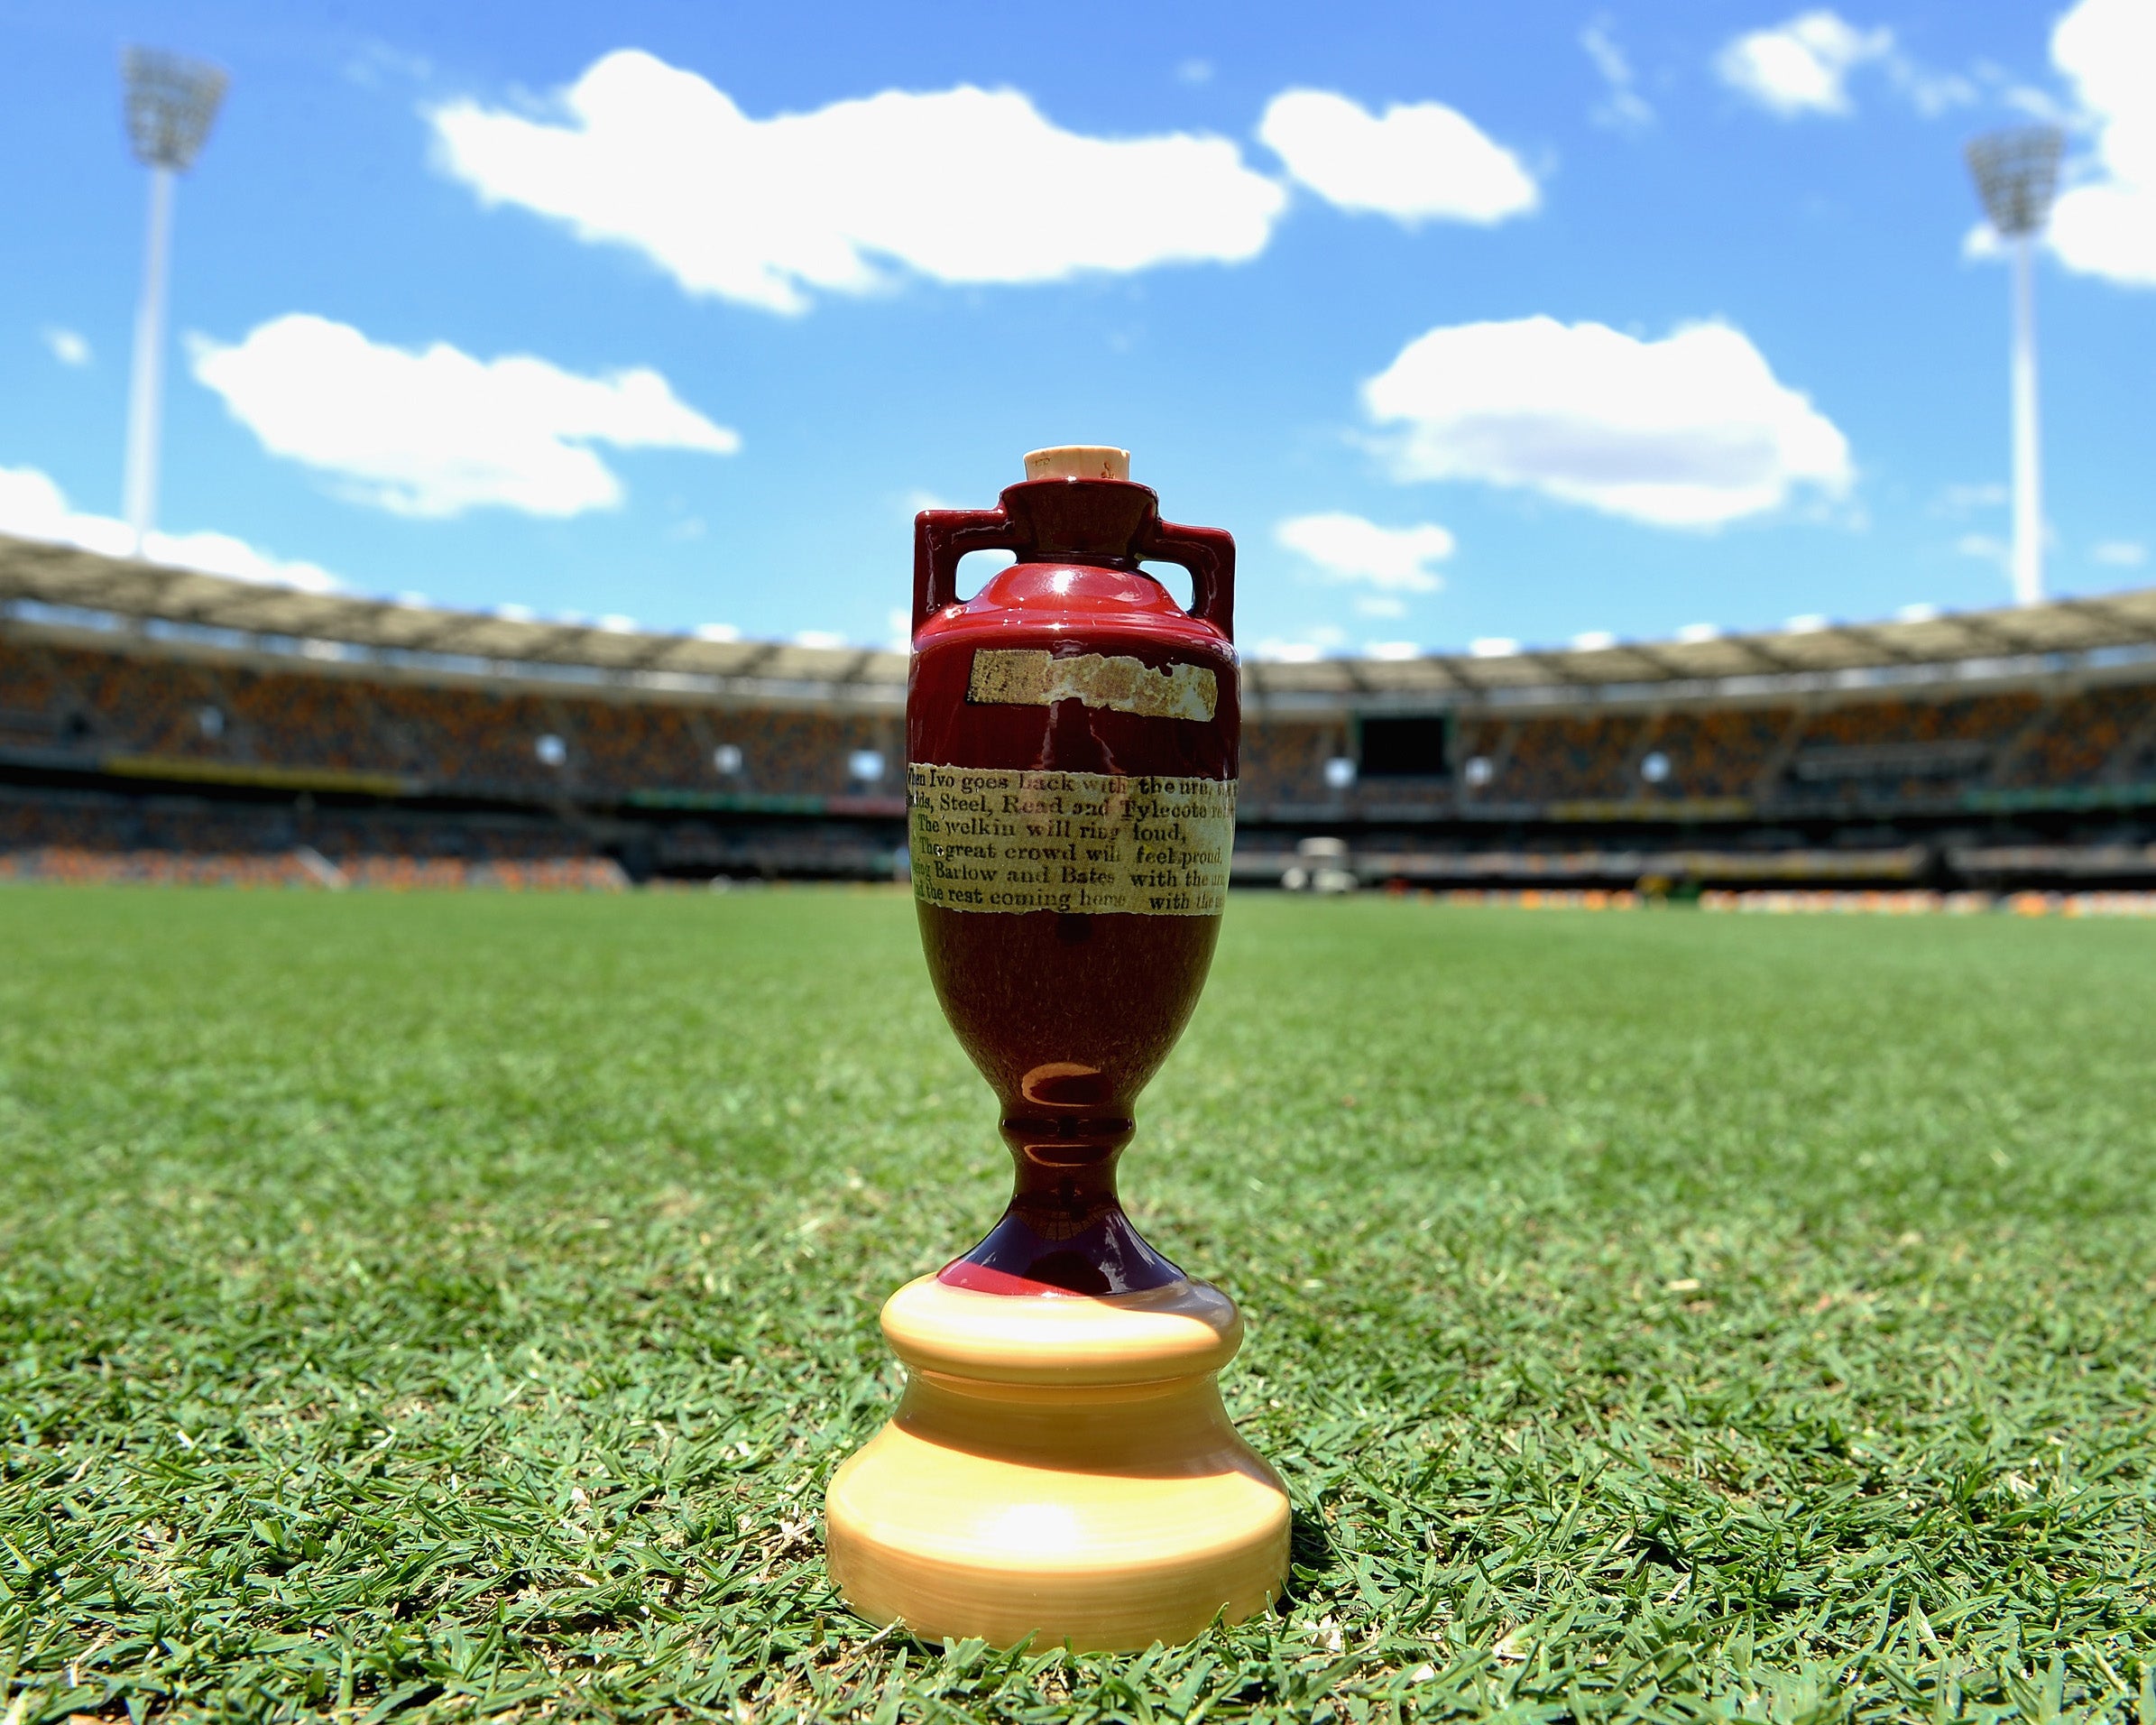 England travel to Australia for the Ashes this winter